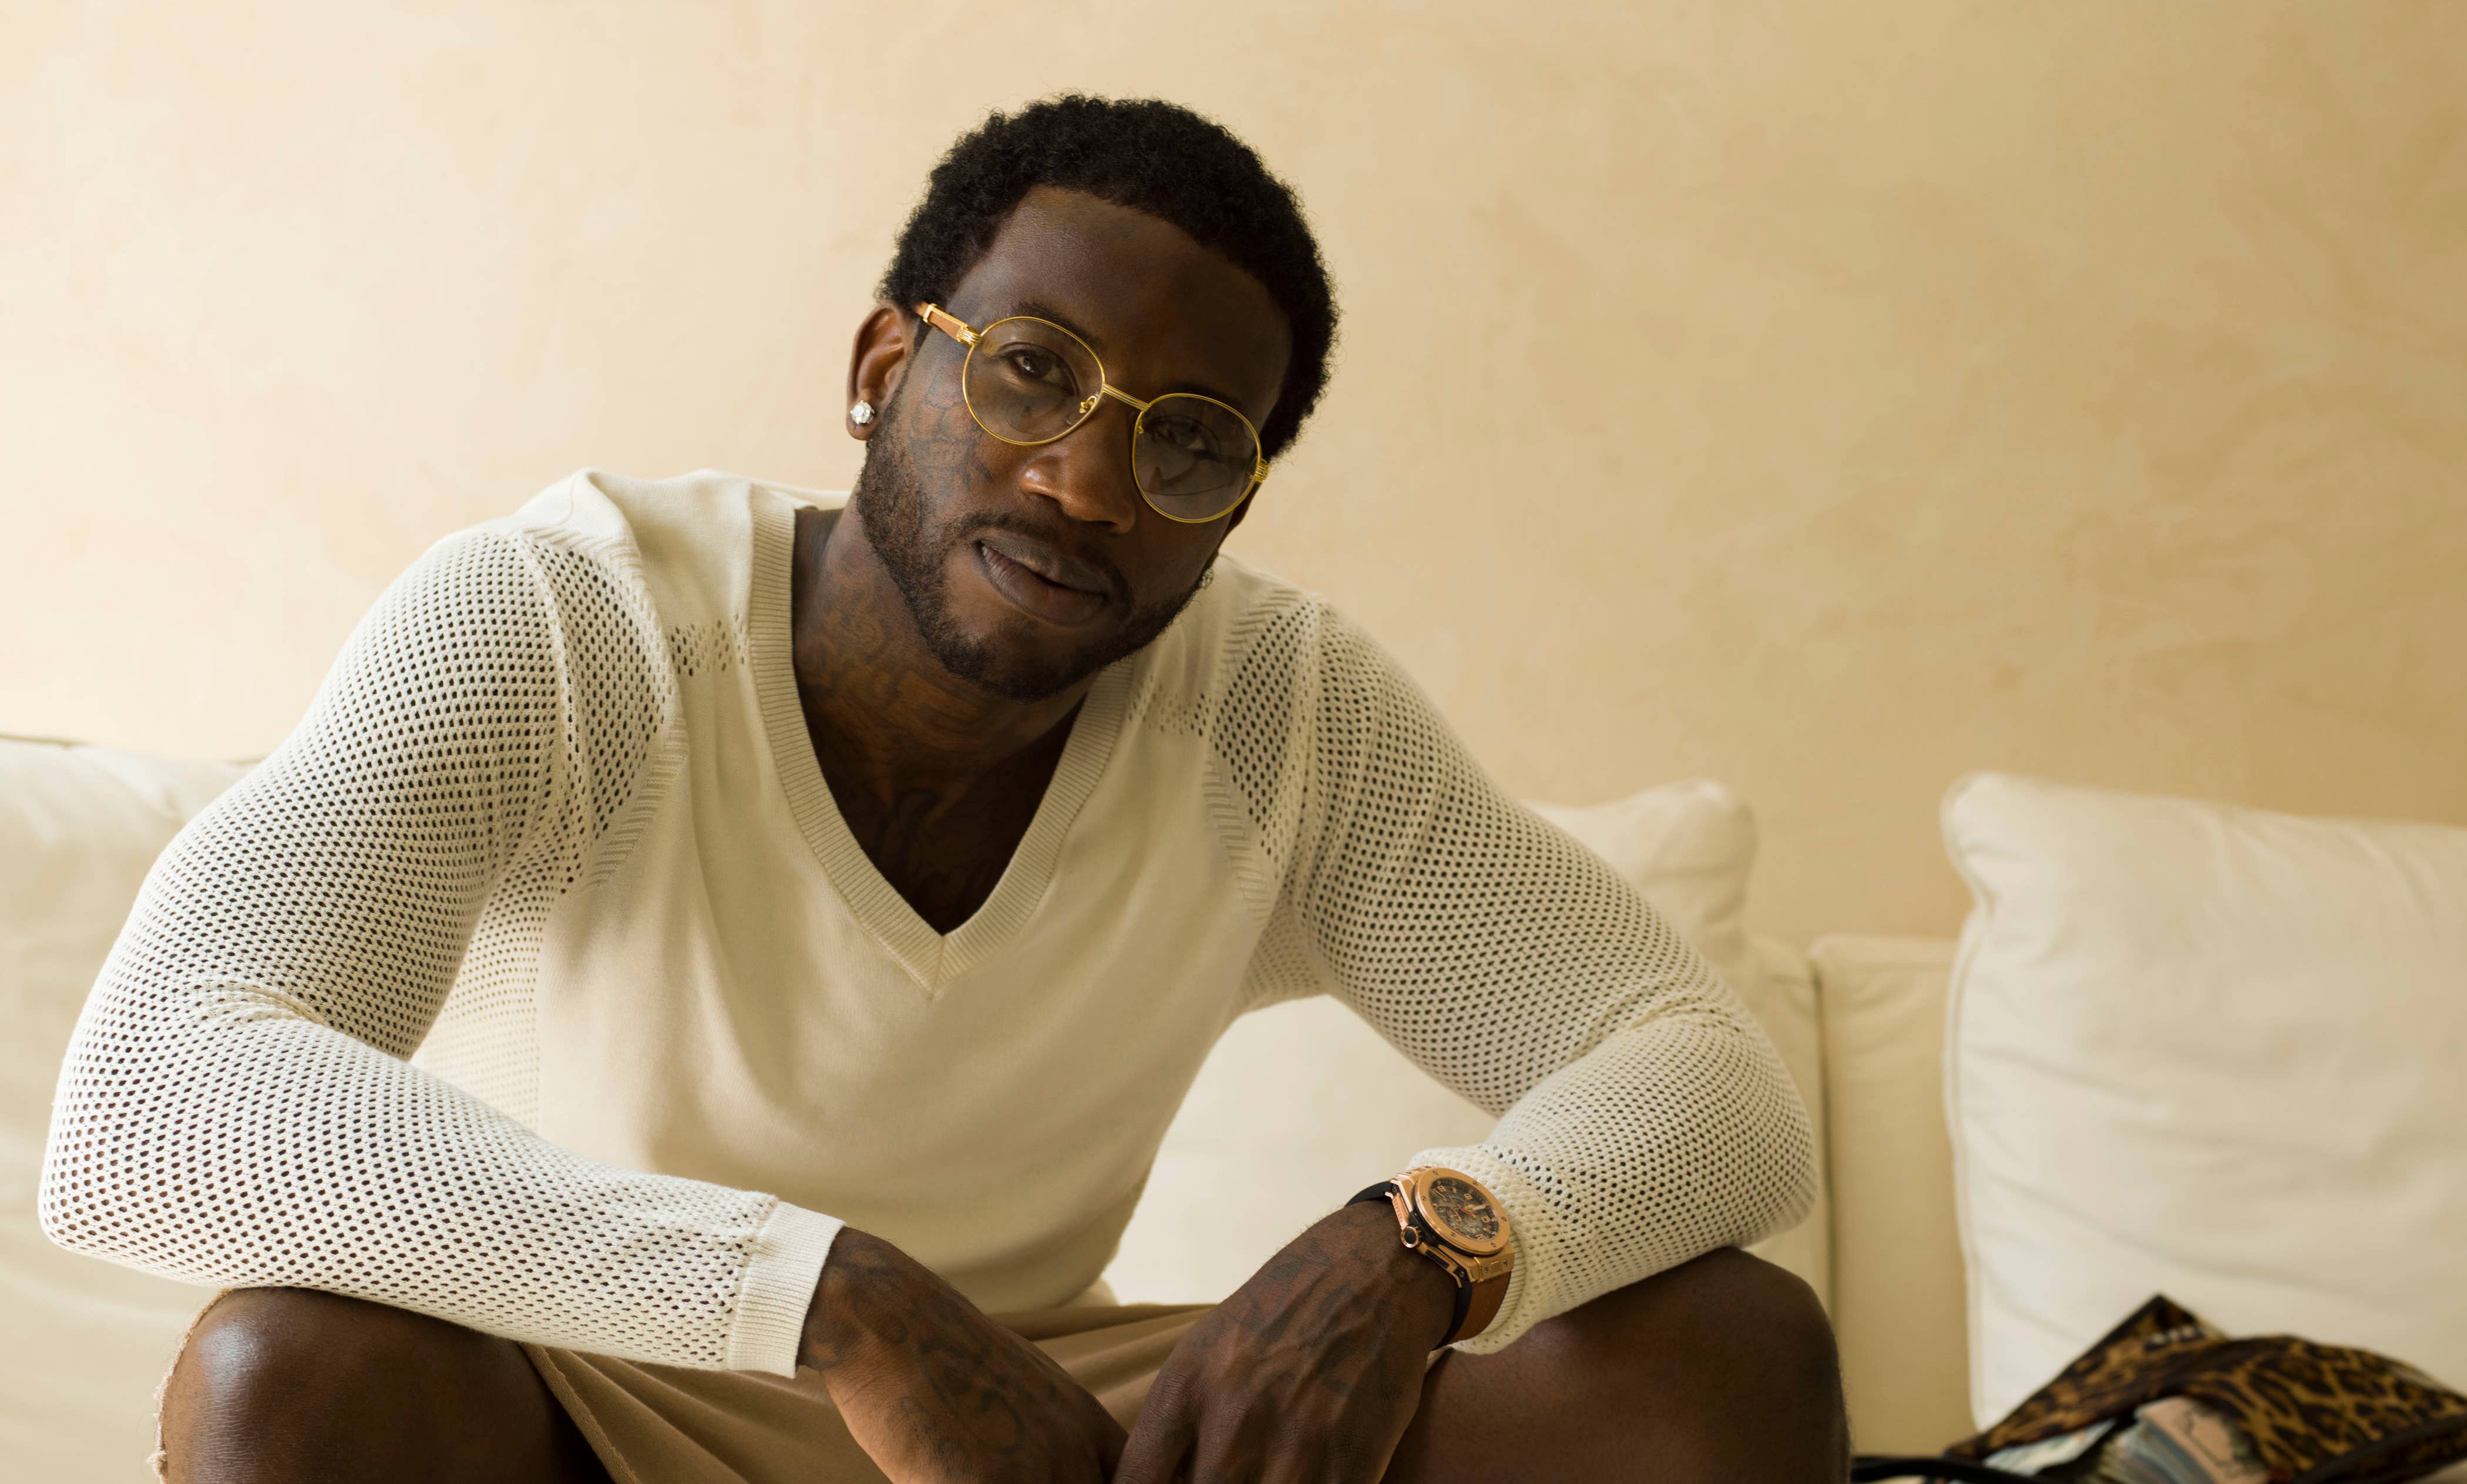 Gucci and Gucci Mane are teaming up for a collaboration that no